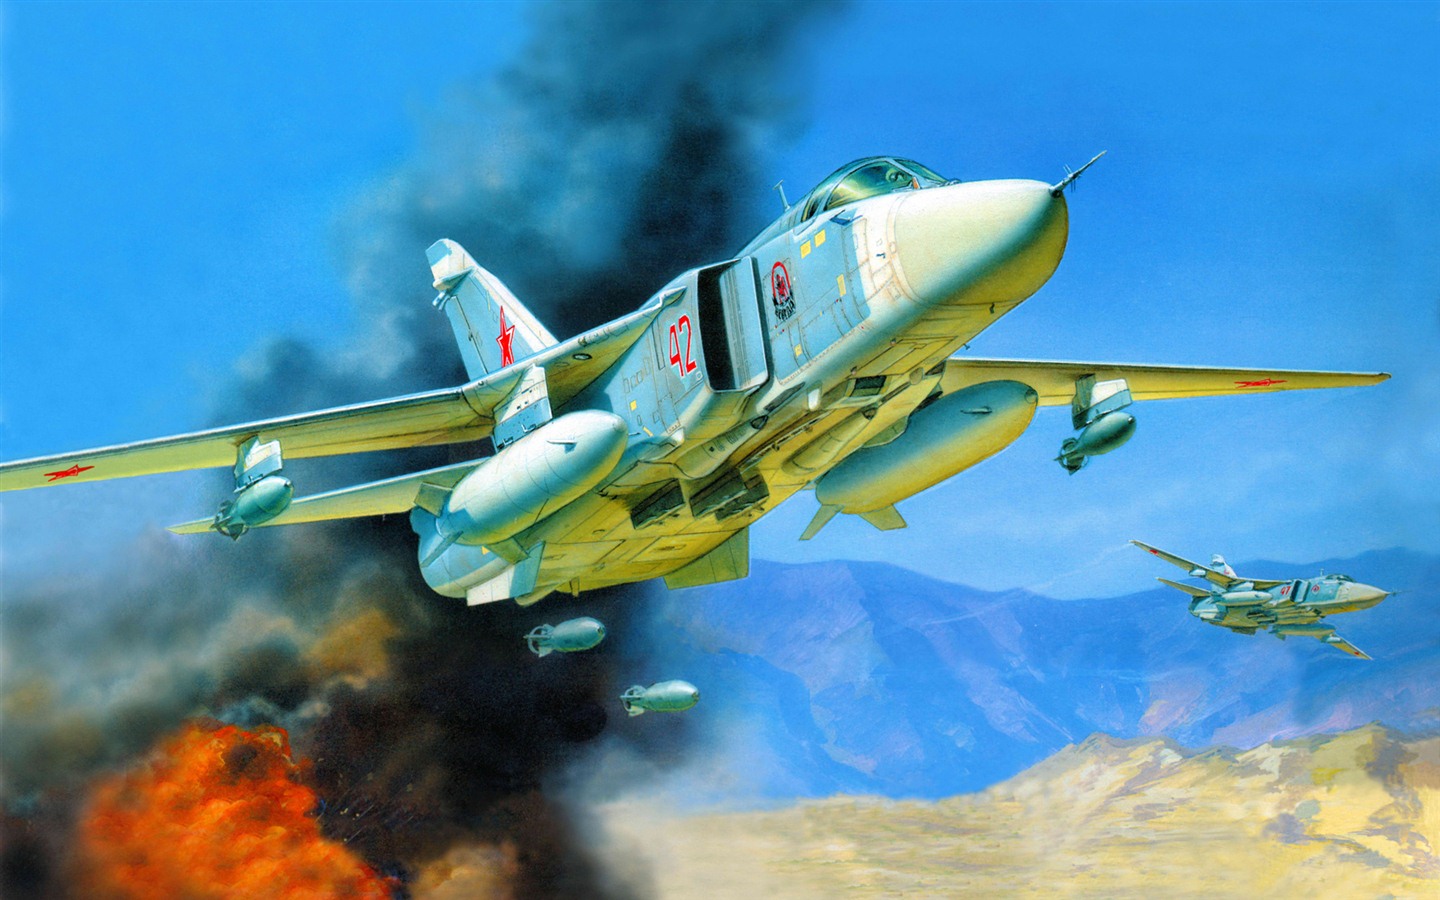 Military aircraft flight exquisite painting wallpapers #3 - 1440x900